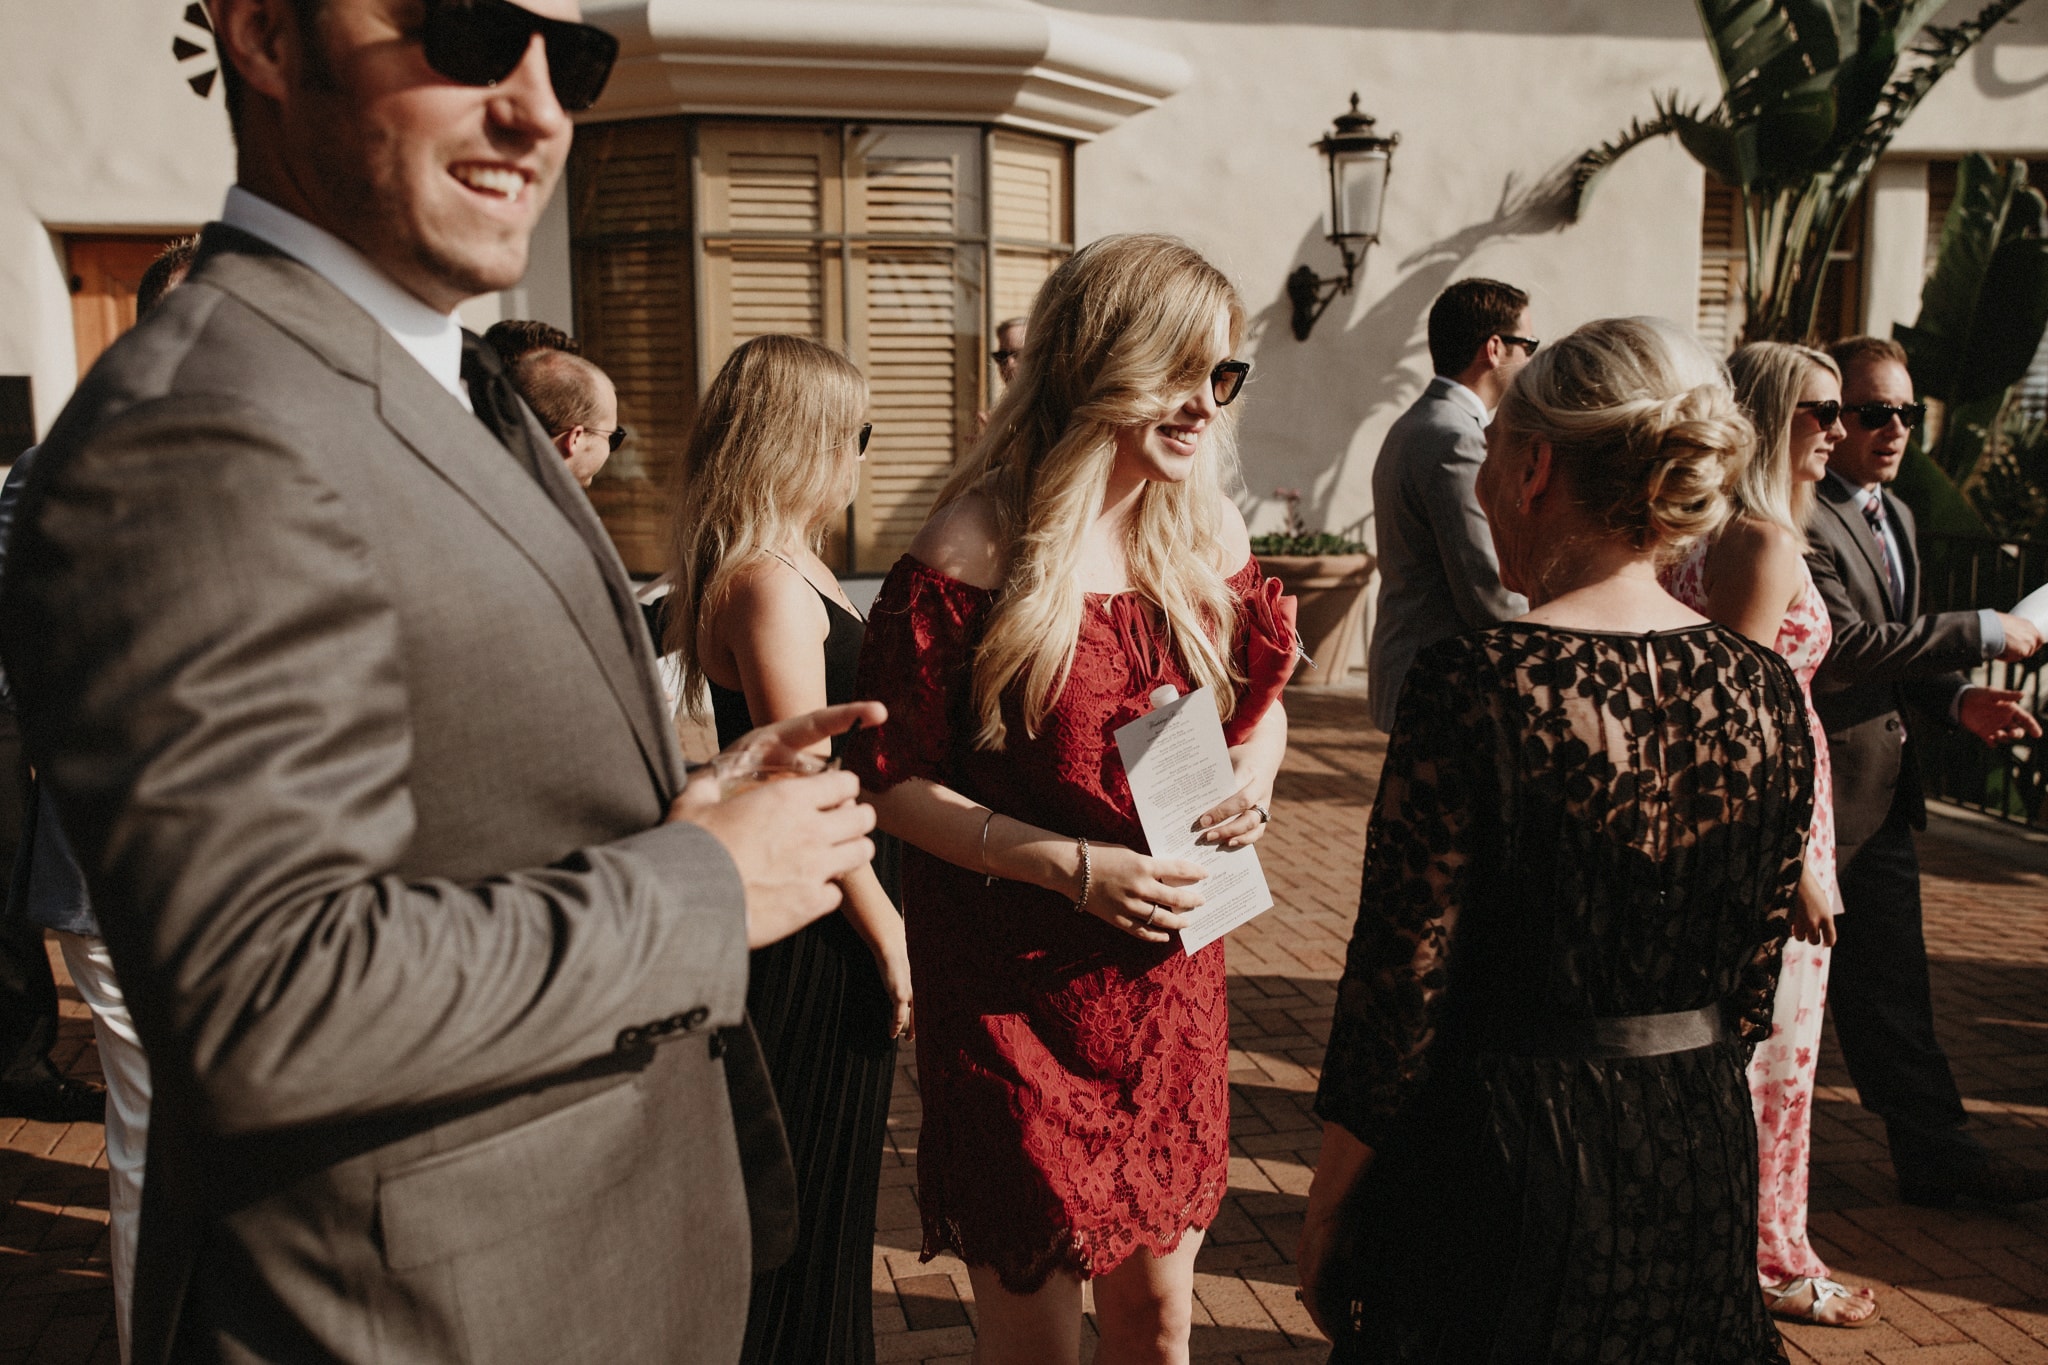 Guests mingle before an outdoor wedding ceremony at The Resort at Pelican Hill on the Newport Coast.